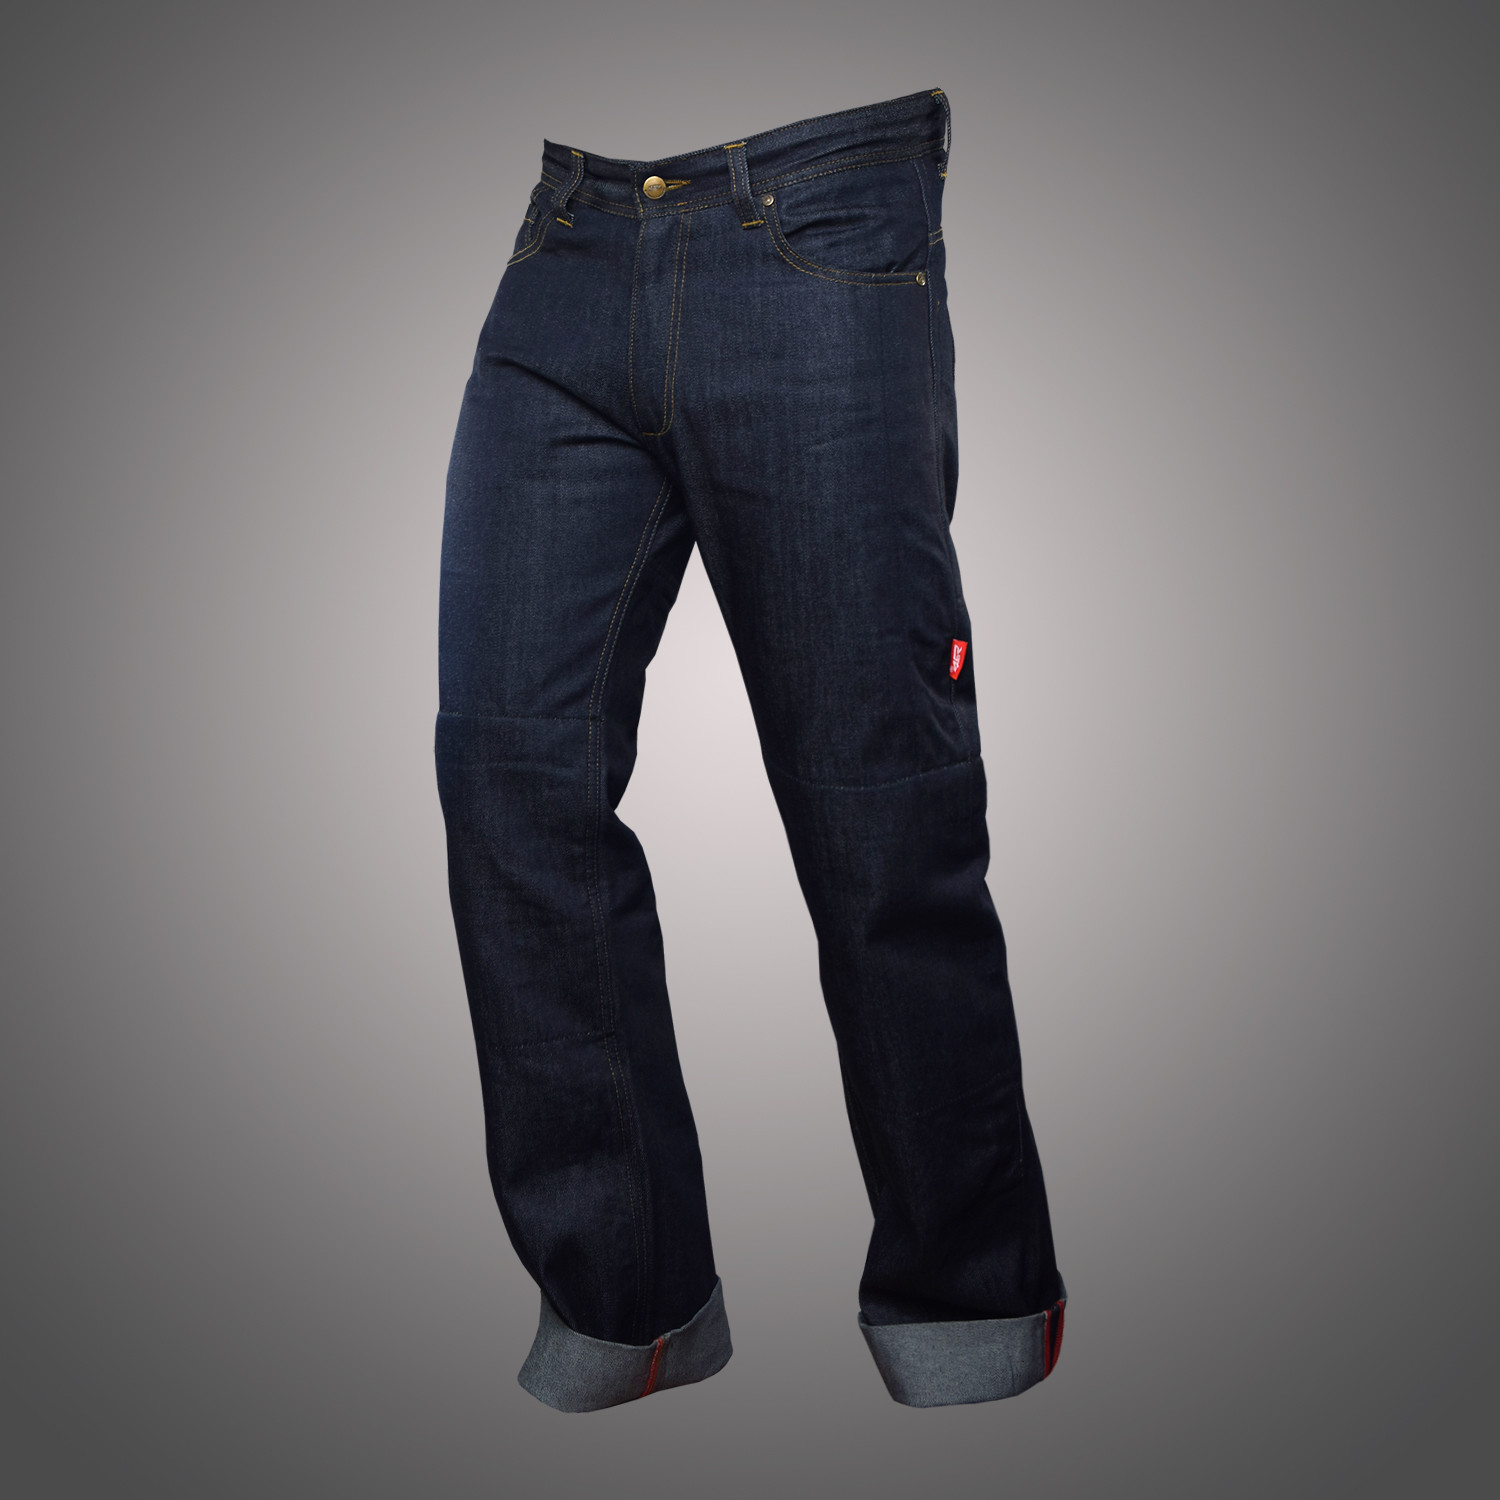 Shift Reinforced made with Kevlar motorcycle jeans 36